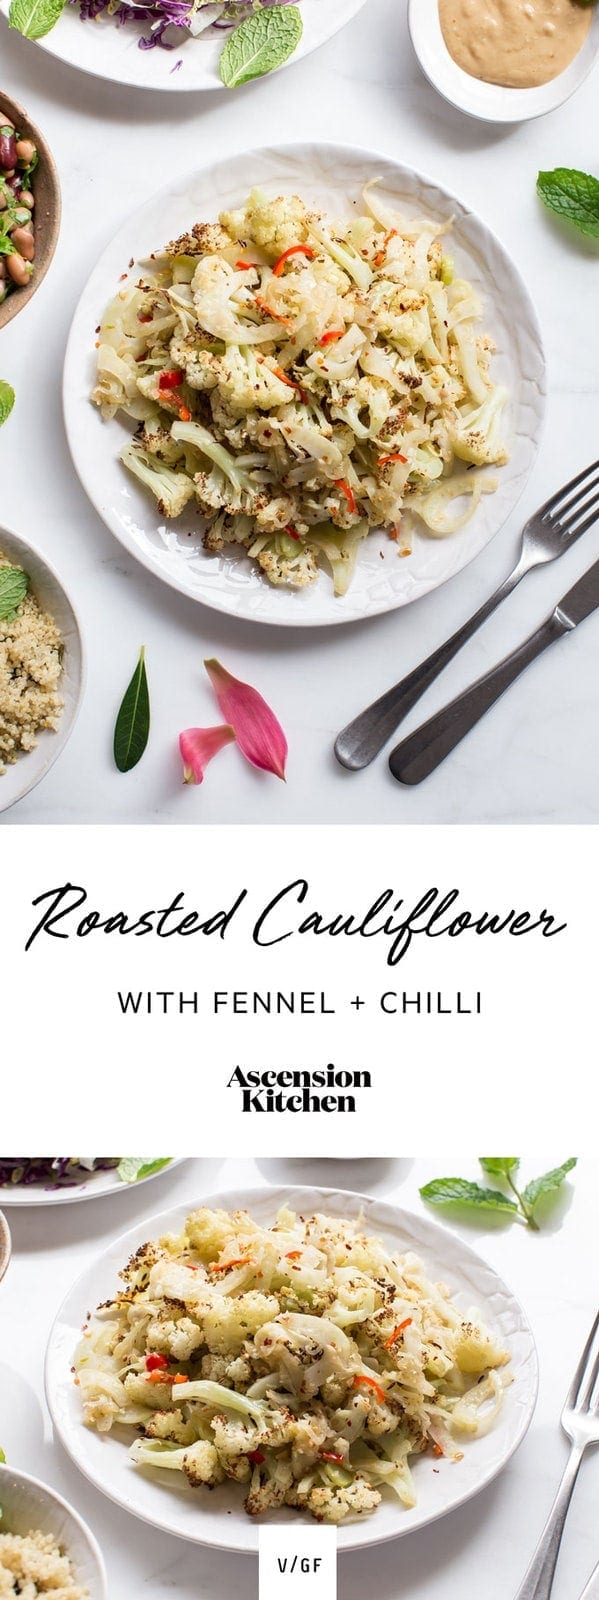 Roasted cauliflower florets with fennel and chilli. A delicious liver-loving side dish. #roastedcauliflowersalad #roastedcauliflowervegan #roastedcauliflowerrecipe #roastedcauliflowereasy #whole30recipes #veganrecipes #whole30dinner #AscensionKitchen  // Pin to your own inspiration board! //